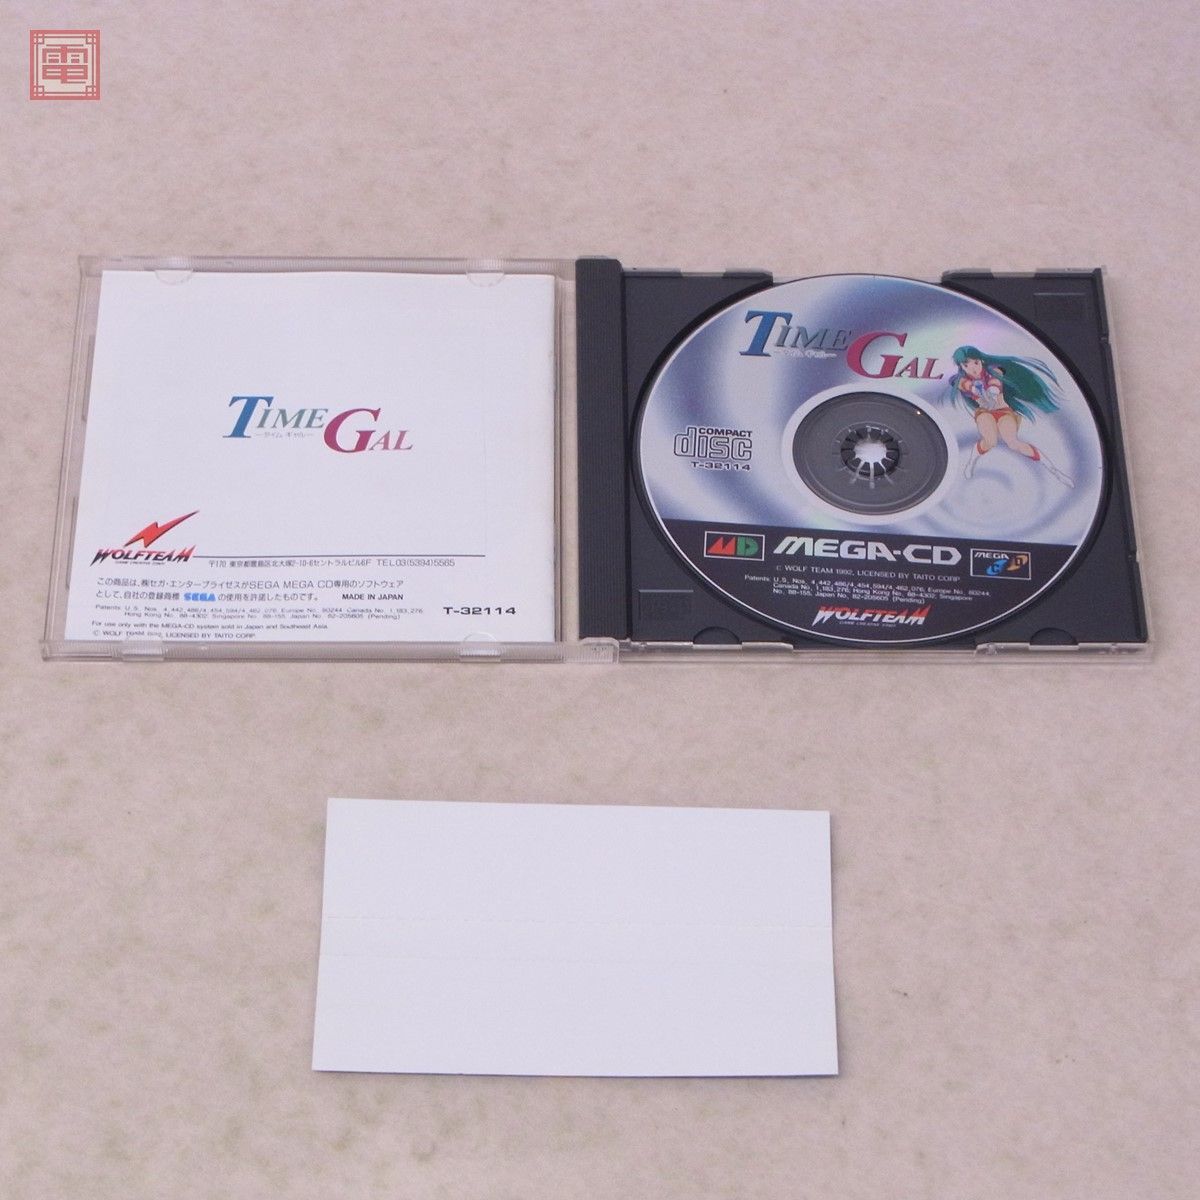  operation guarantee goods MD mega CD time girl TIME GAL Wolf team WOLFTEAM box opinion with belt [10